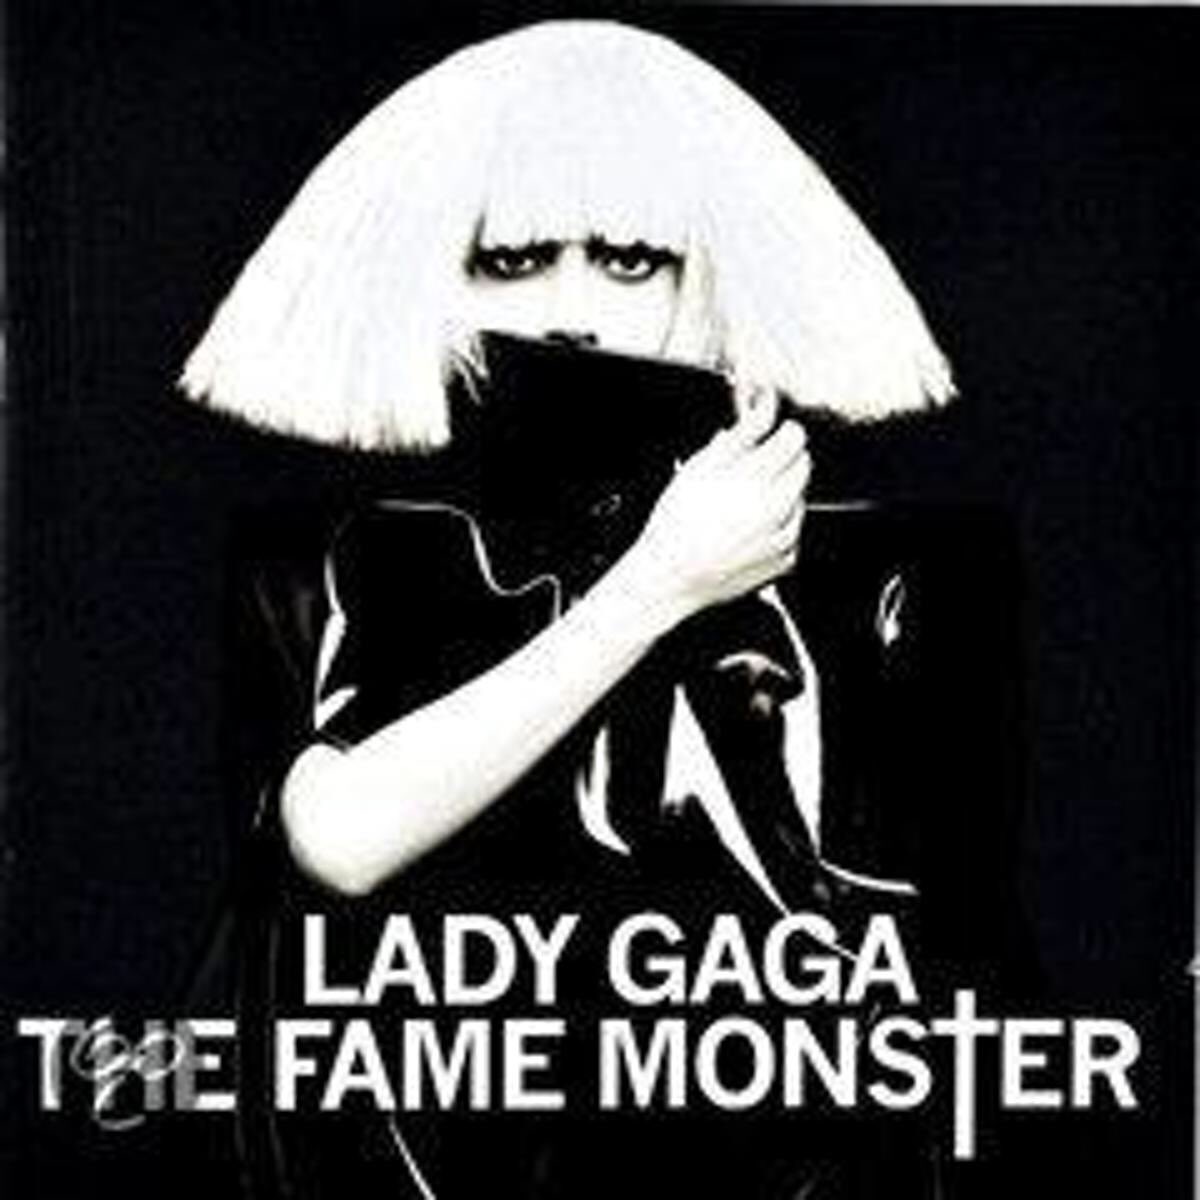 top 3 from the fame monster by lady gaga